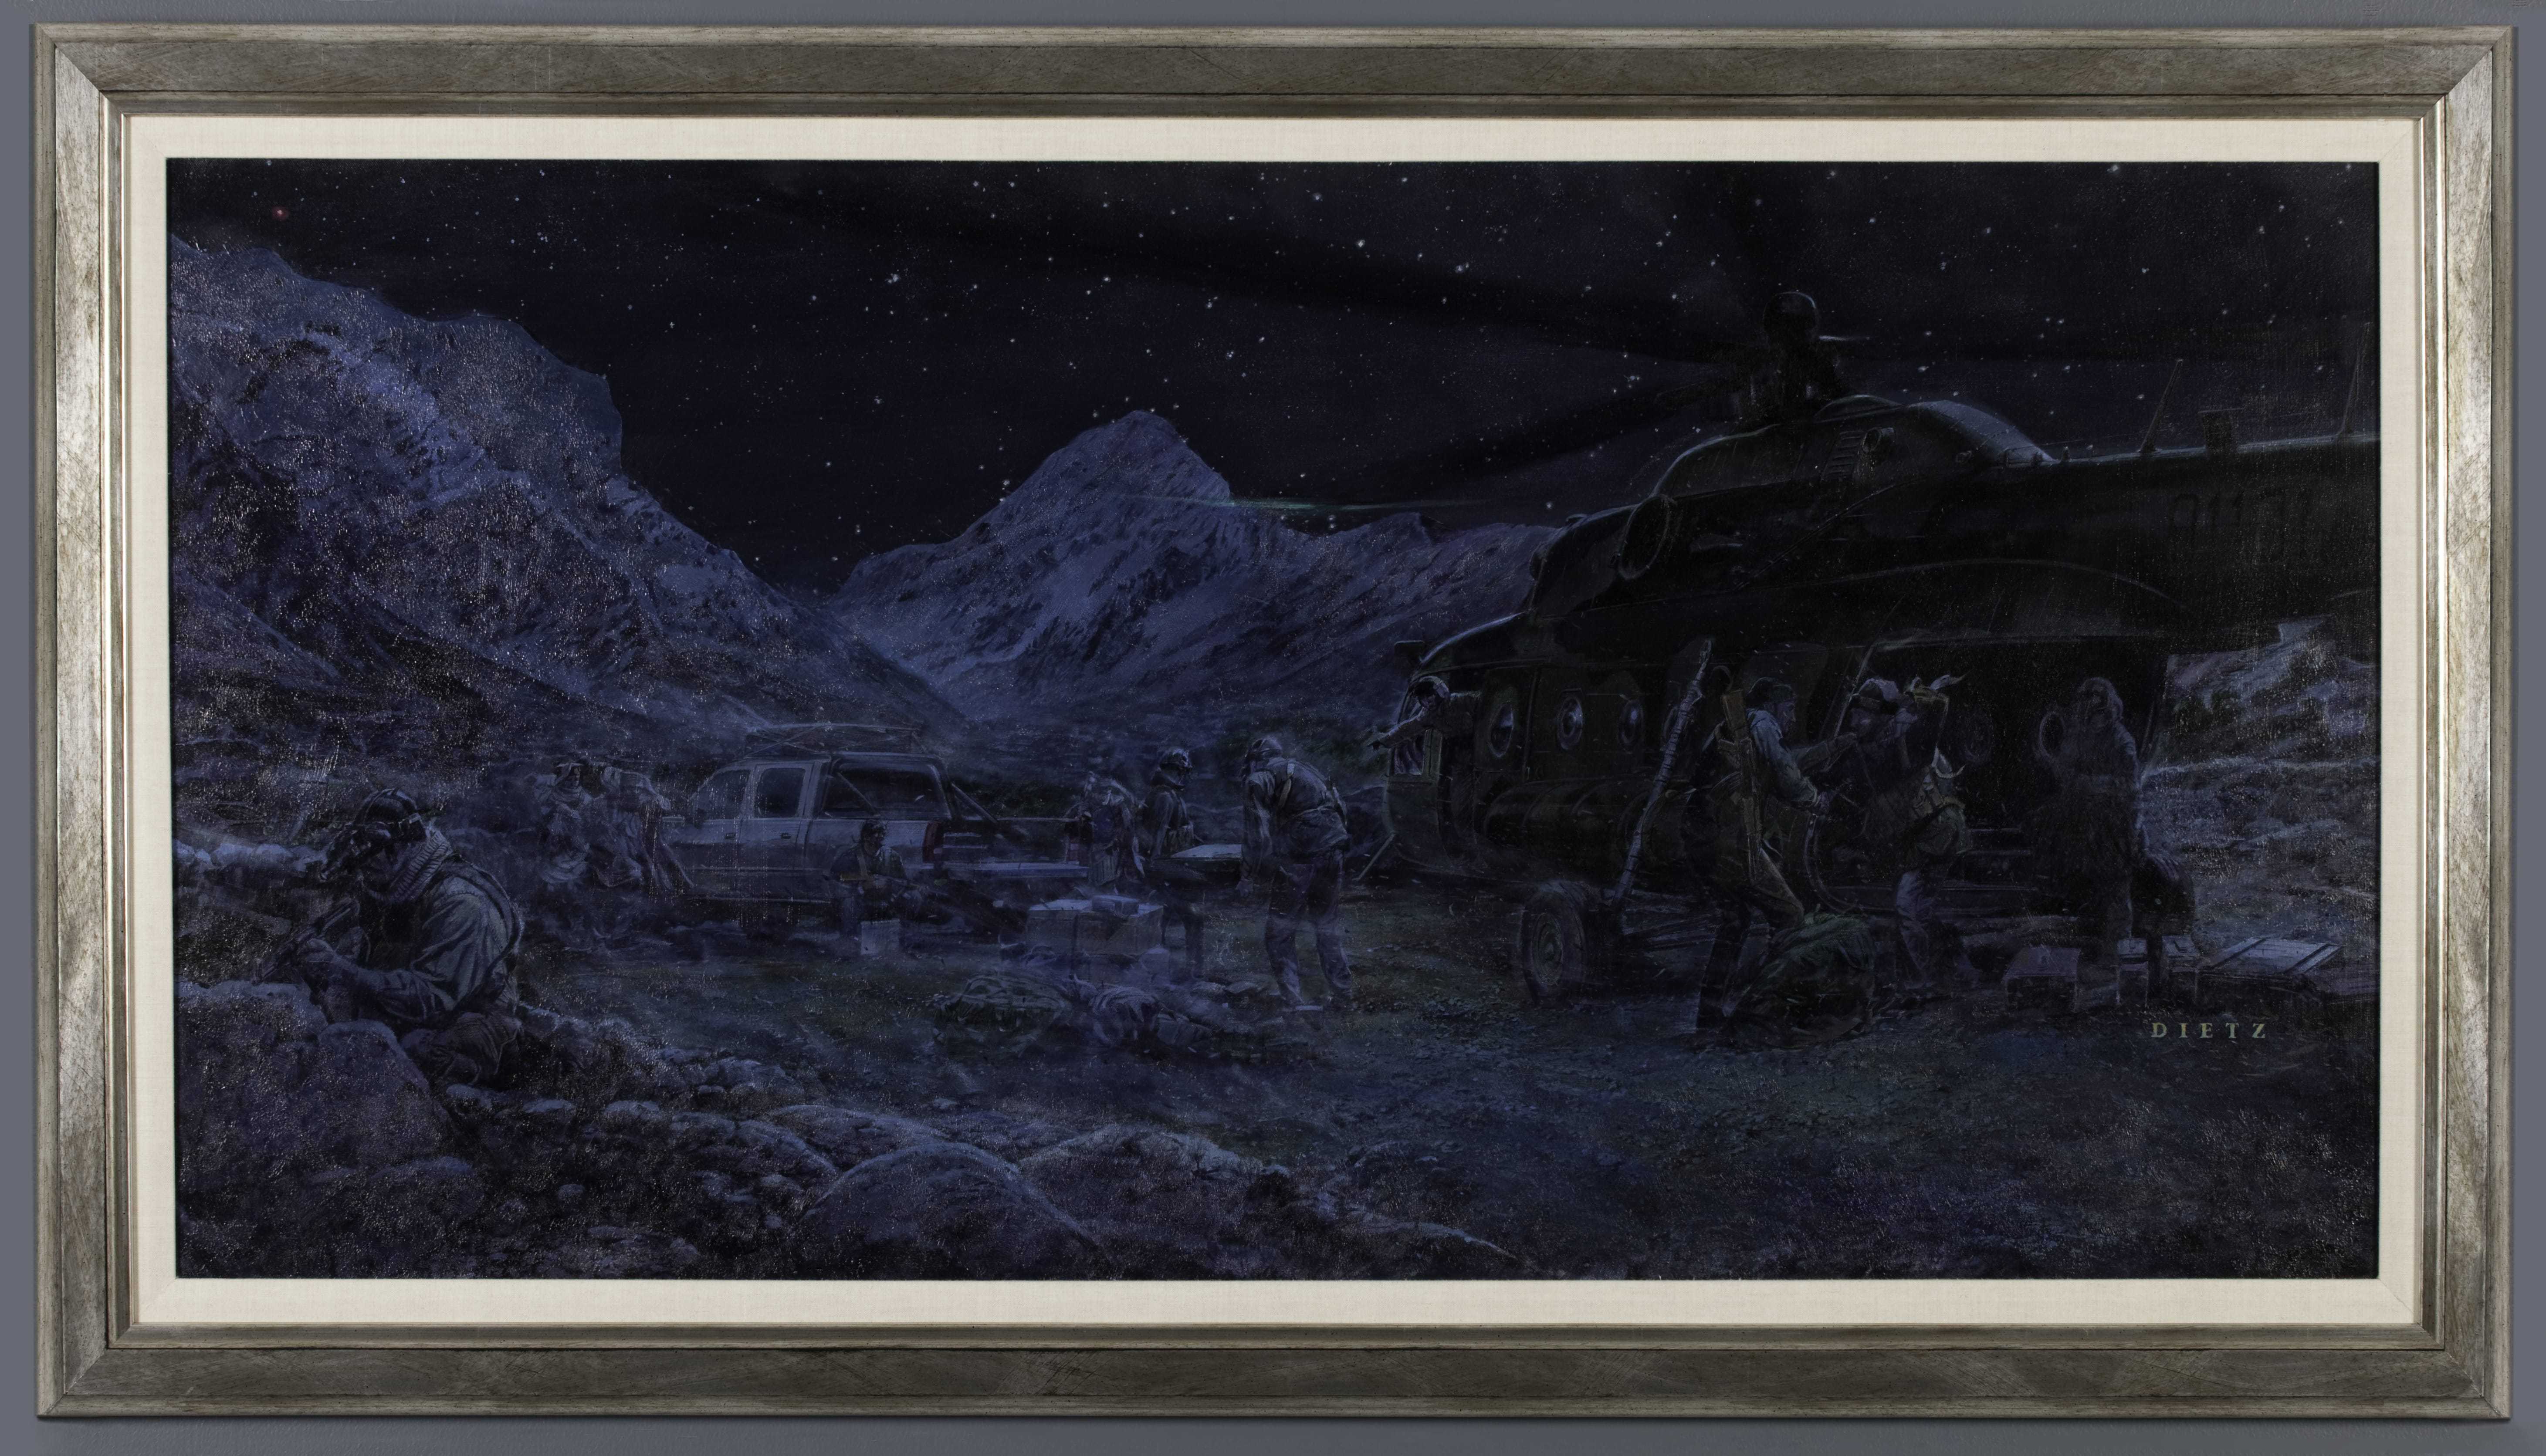 A painting of CIA officers unloading supplies from a Mi-17 helicopter in Afghanistan at night